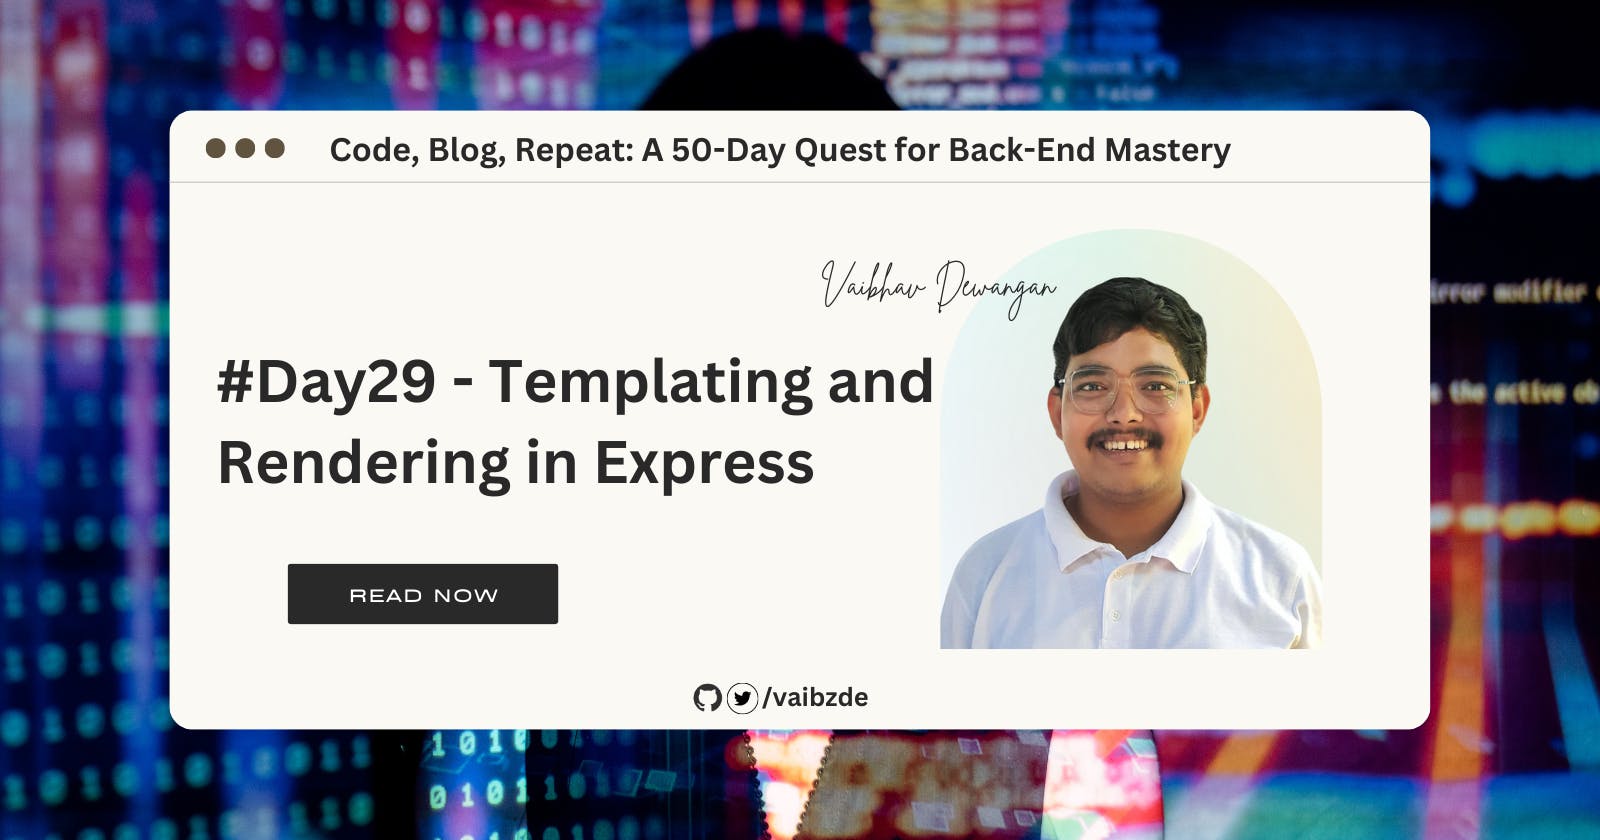 #Day29 - Templating and Rendering in Express